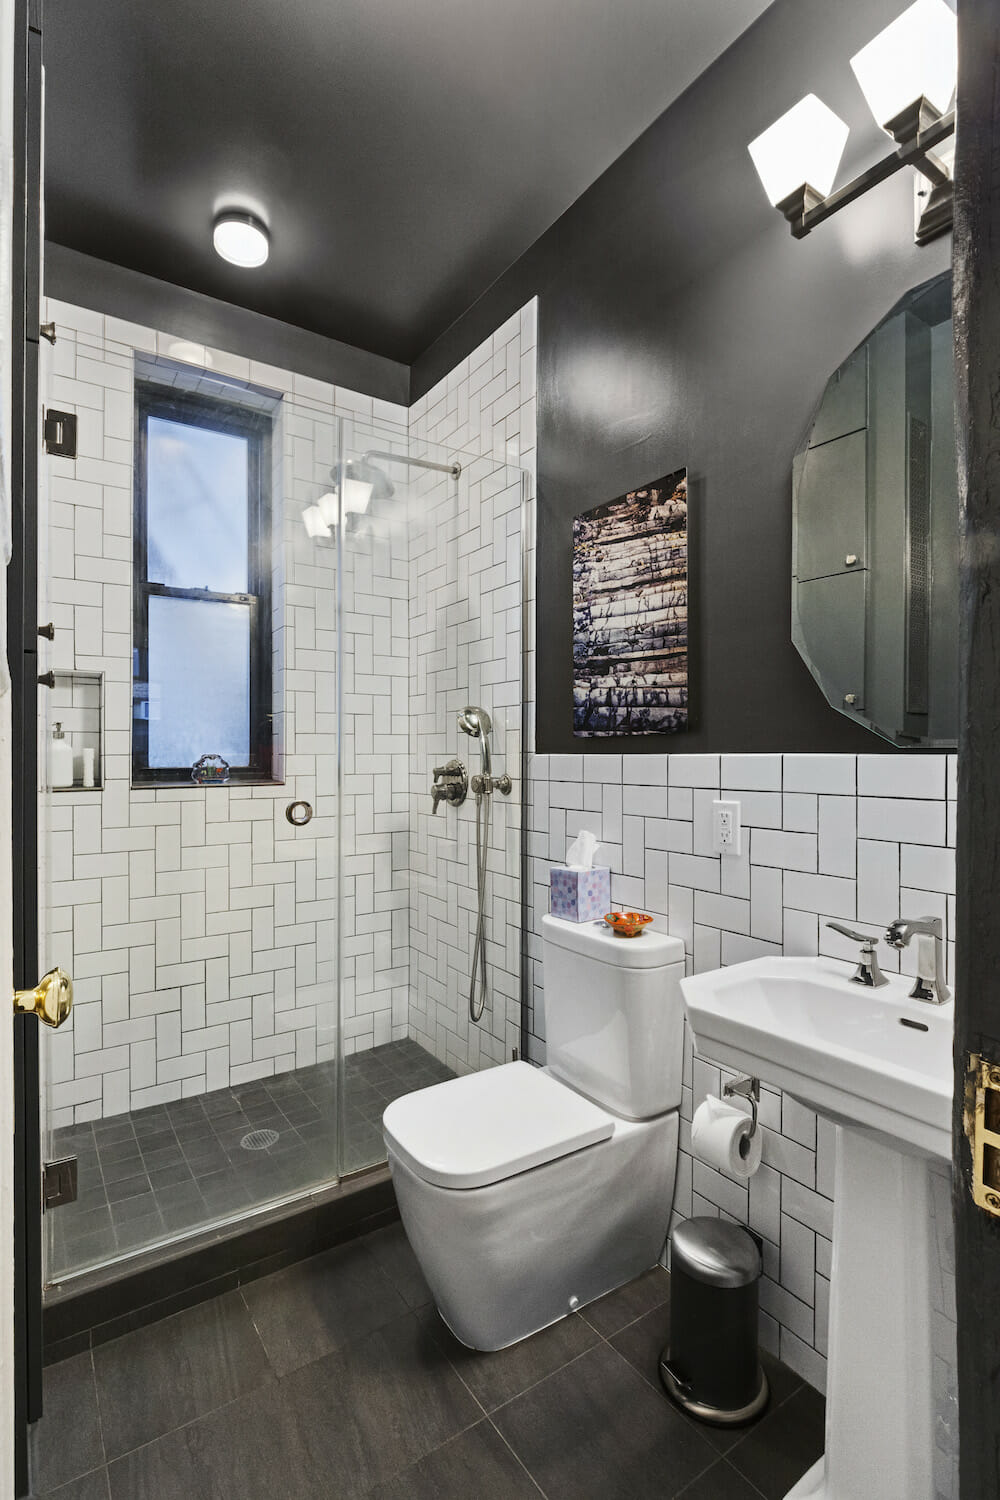 Image of a bathroom with white subway tile in a herringbone pattern